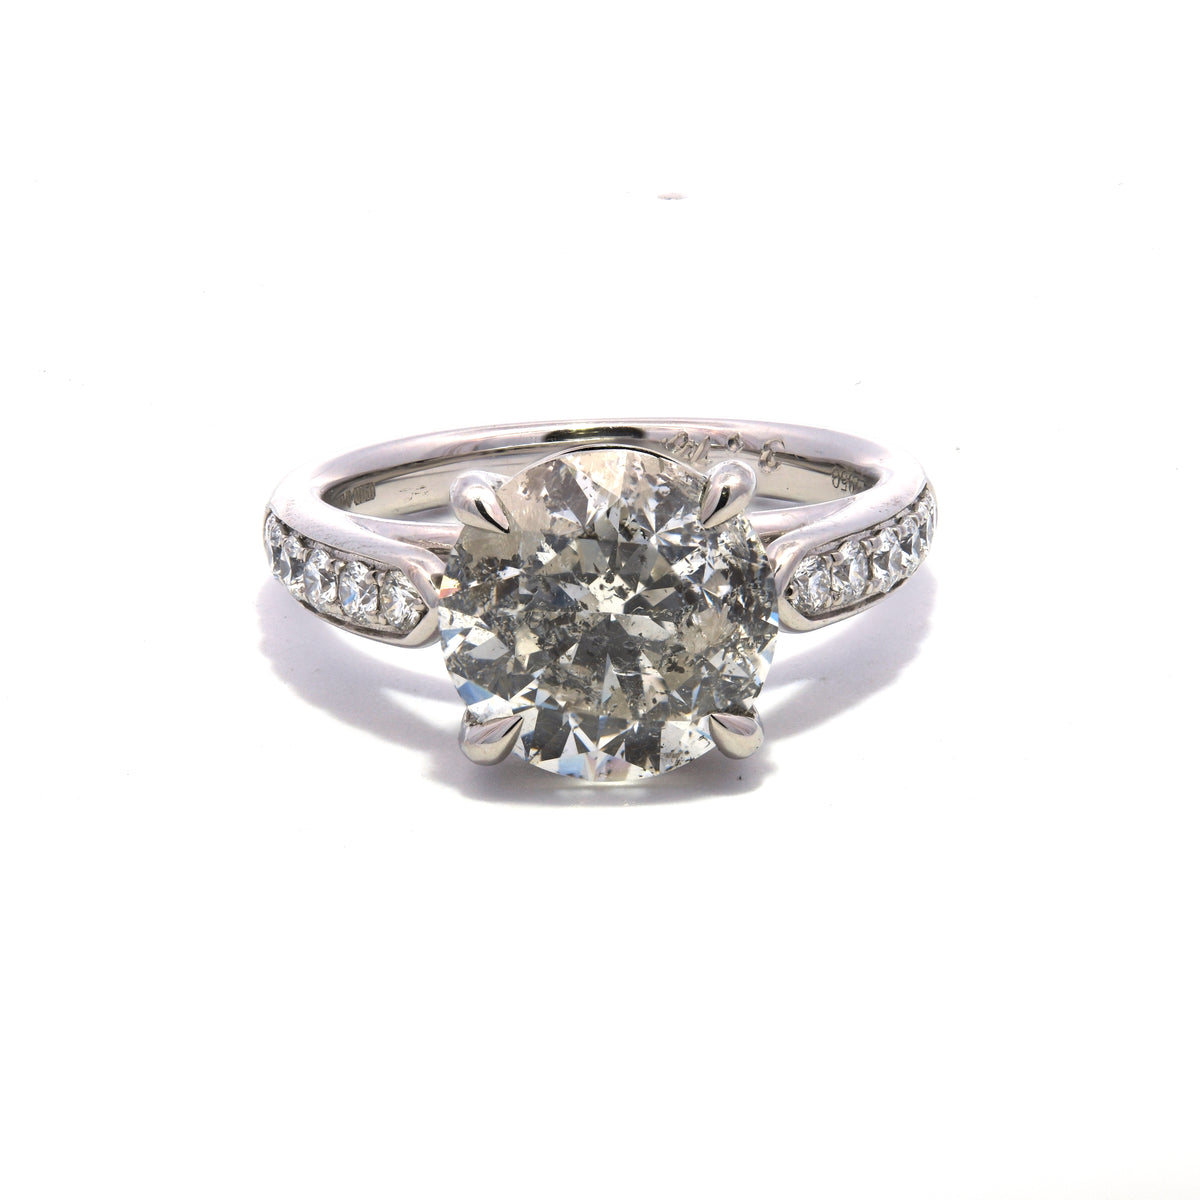 Round Brilliant Engagement RIng in 4.11 cts with Channel Setting on the Shoulders in Platinum 950